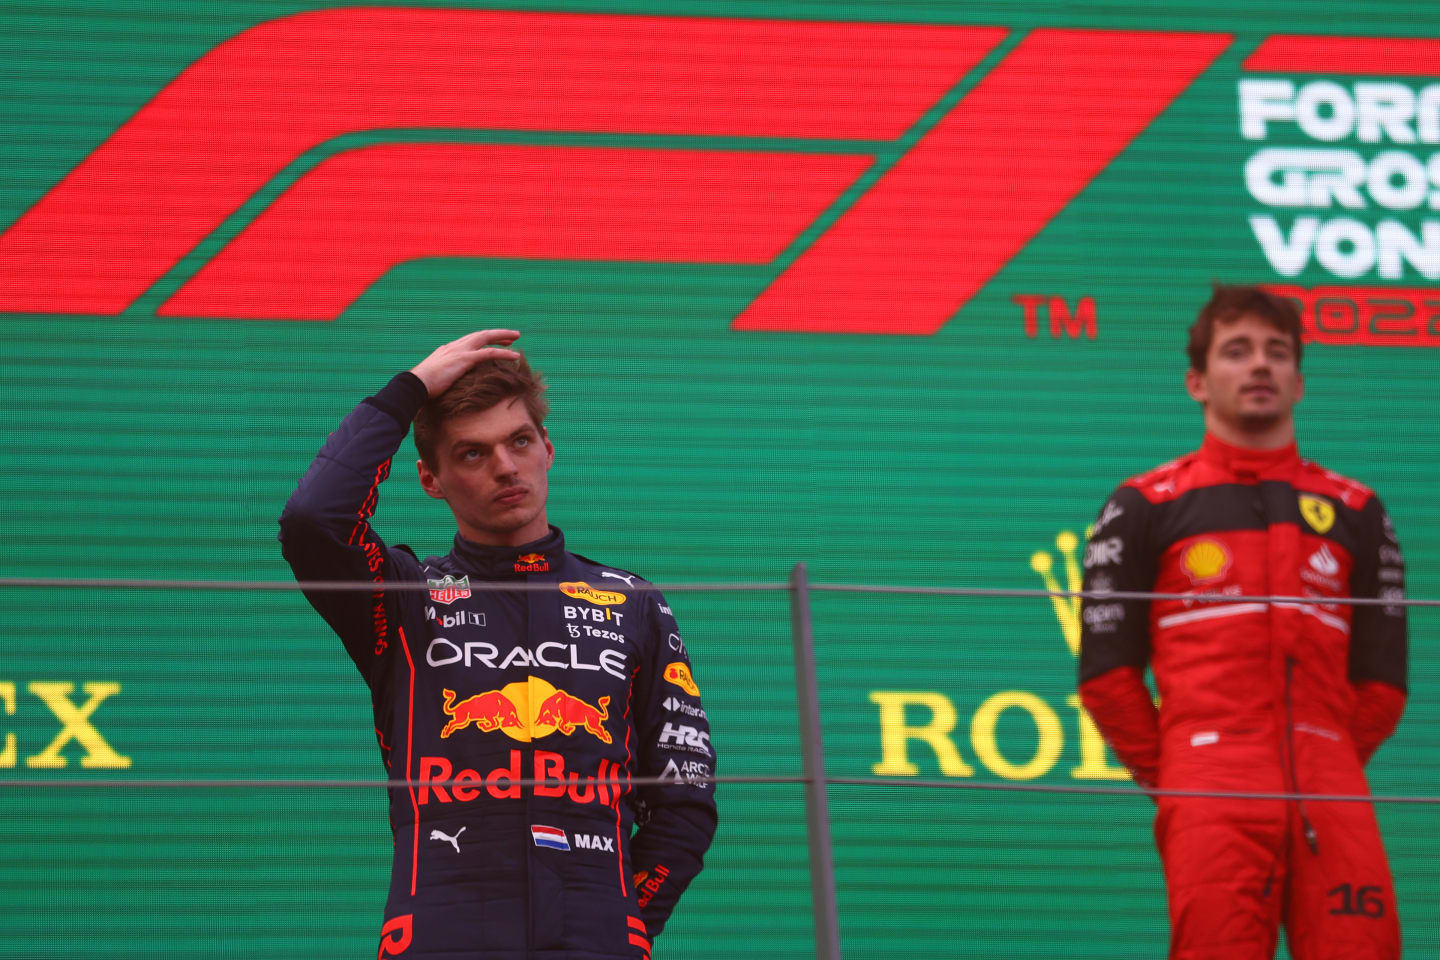 SPIELBERG, AUSTRIA - JULY 10: Second placed Max Verstappen of the Netherlands and Oracle Red Bull